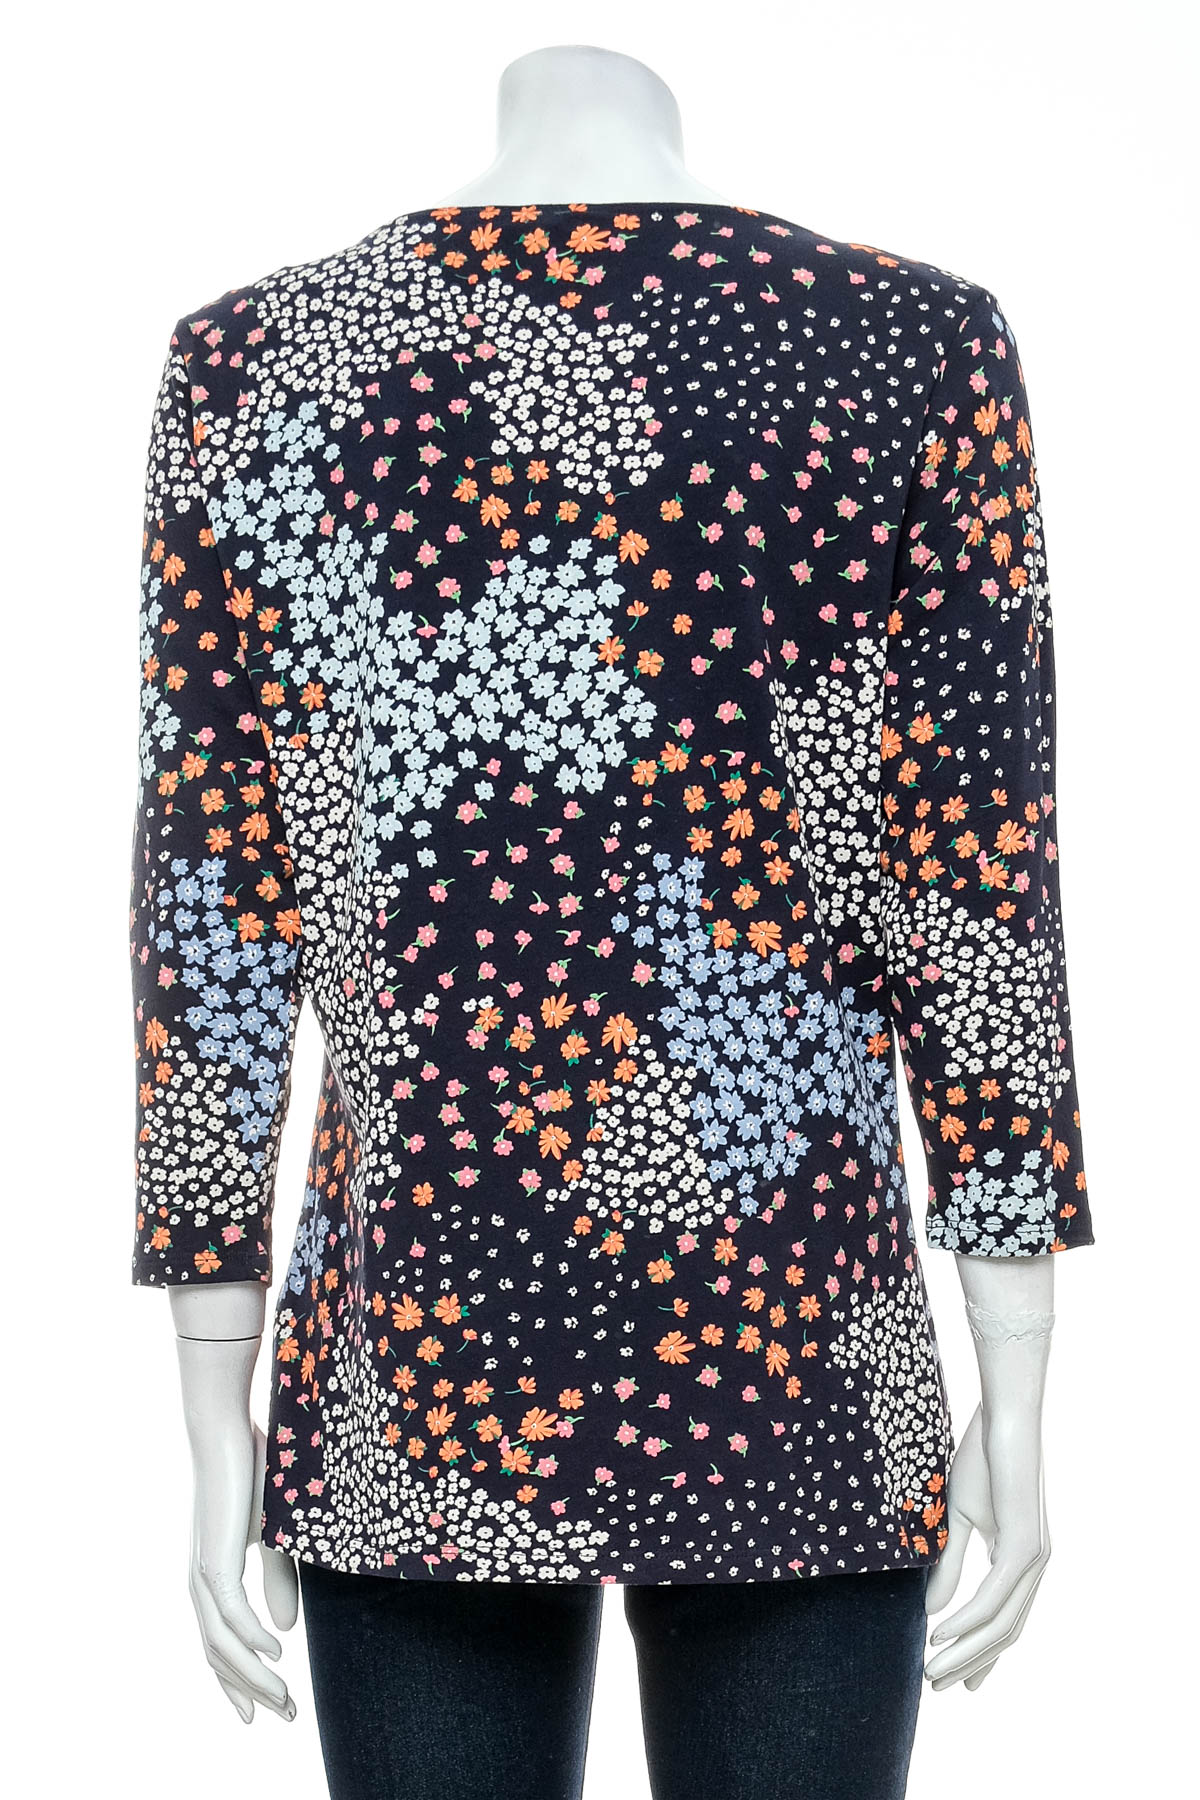 Women's blouse - M&S COLLECTION - 1